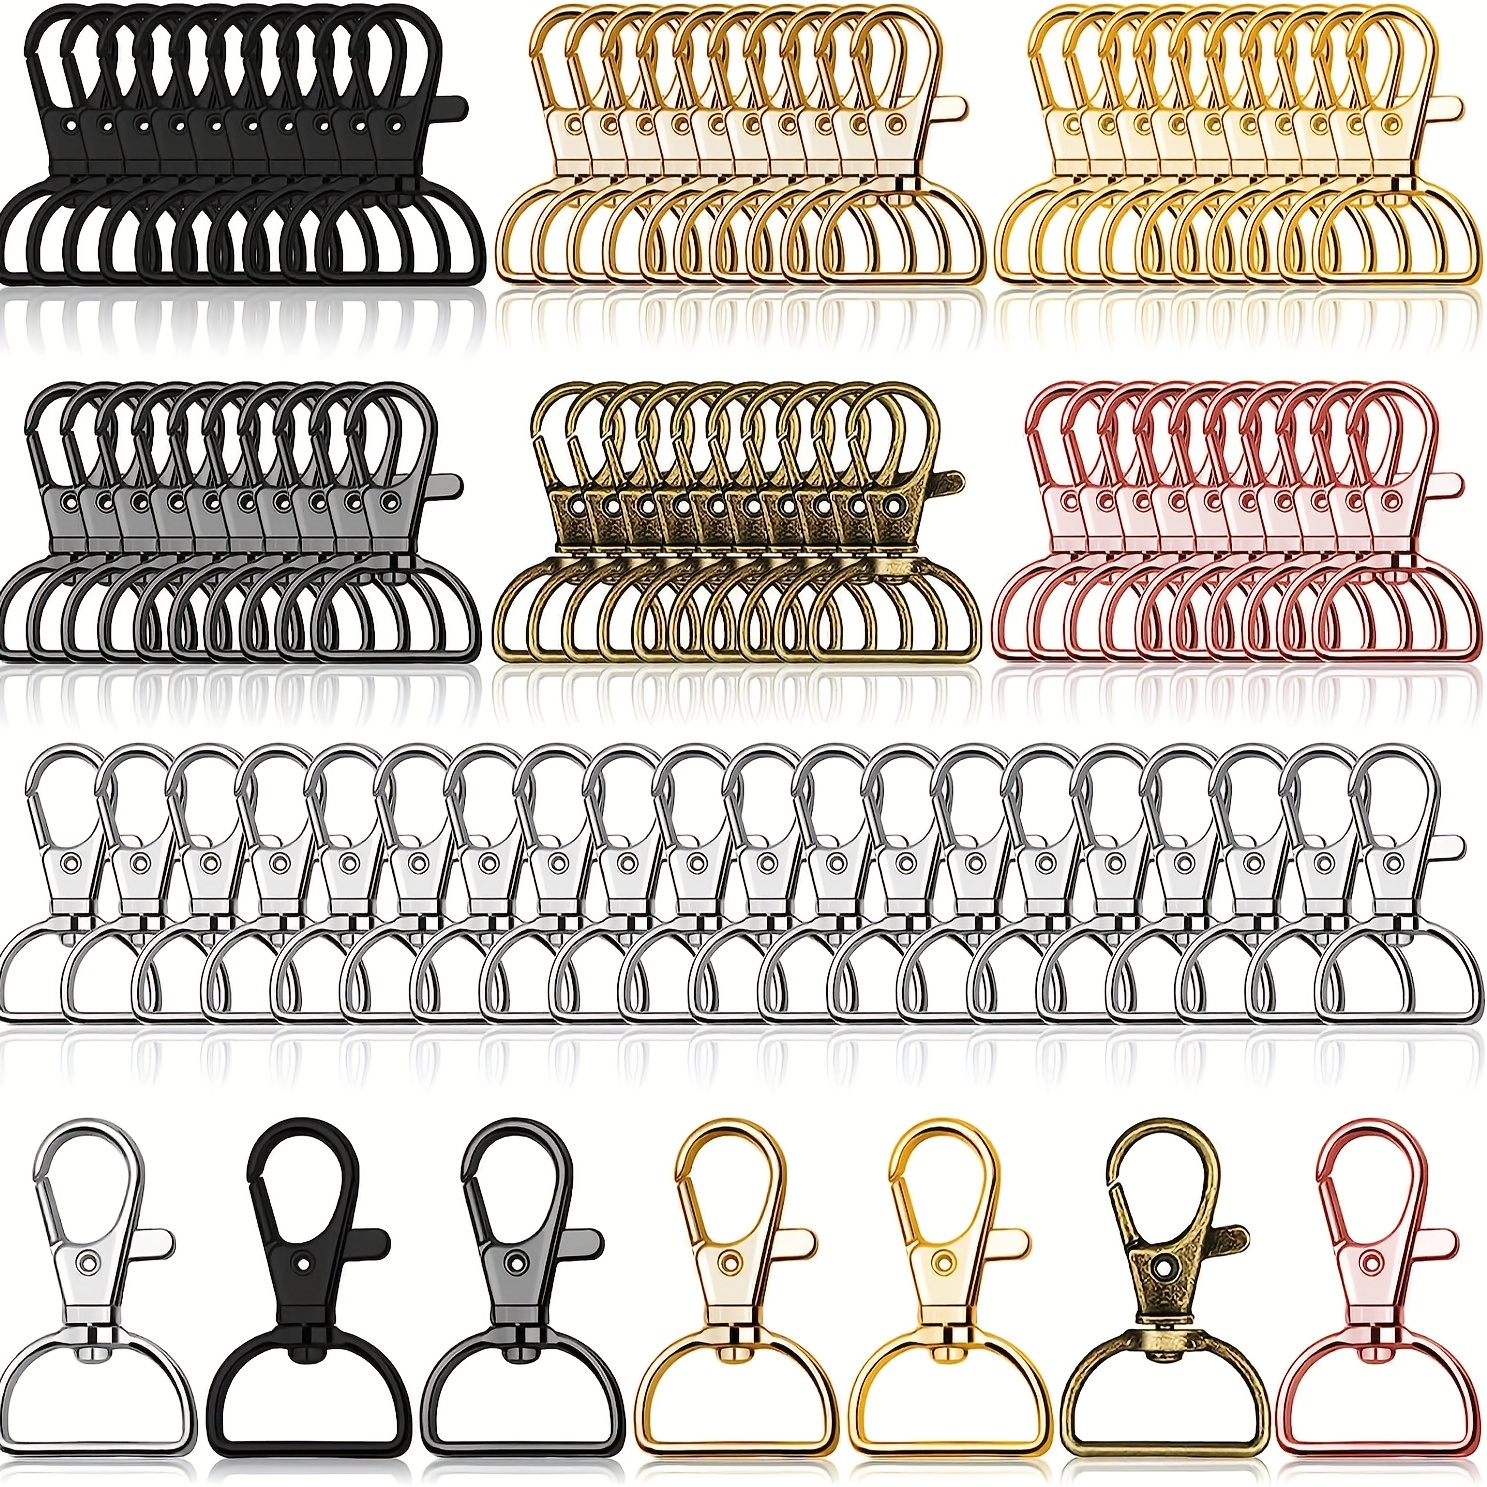 Attach Plasctic Shackle Carabiner D-Ring Clip Molle Webbing Backpack Buckle  Snap